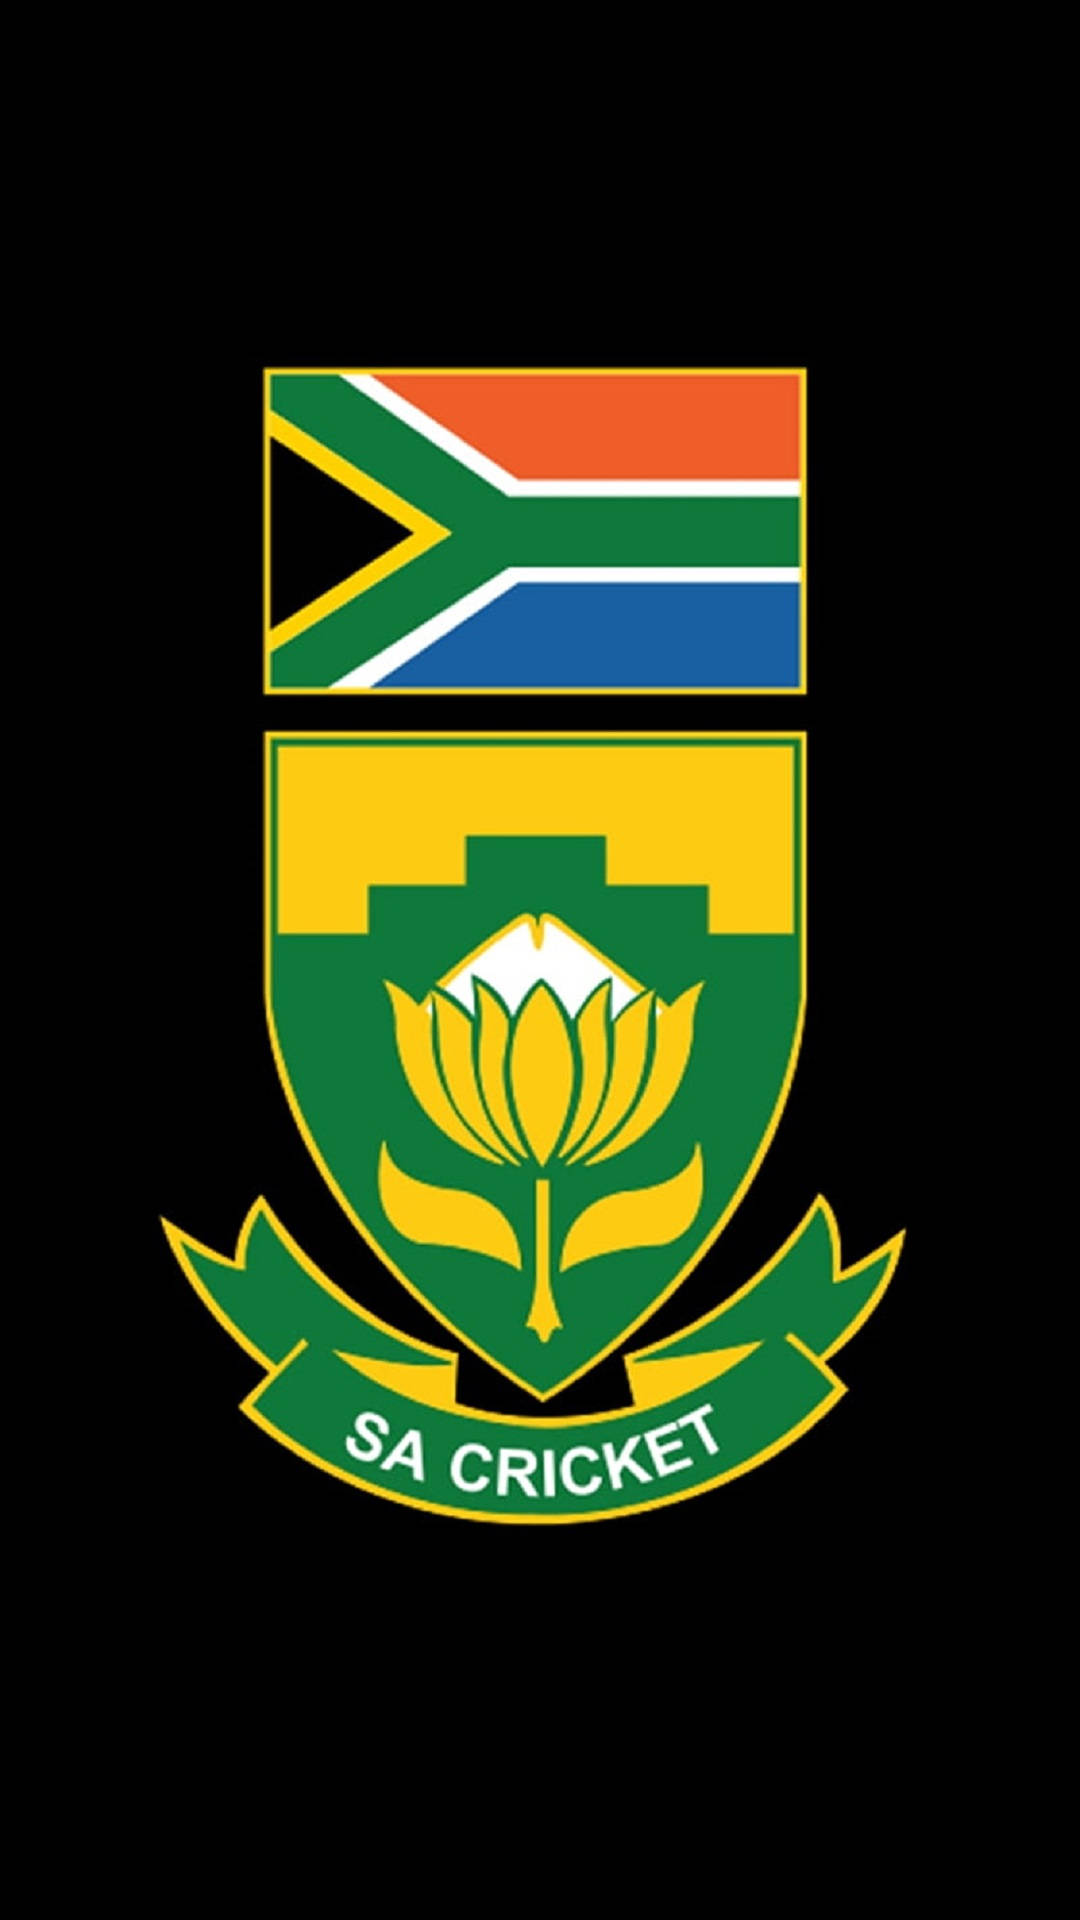 South Africa Cricket Logo In Black Background